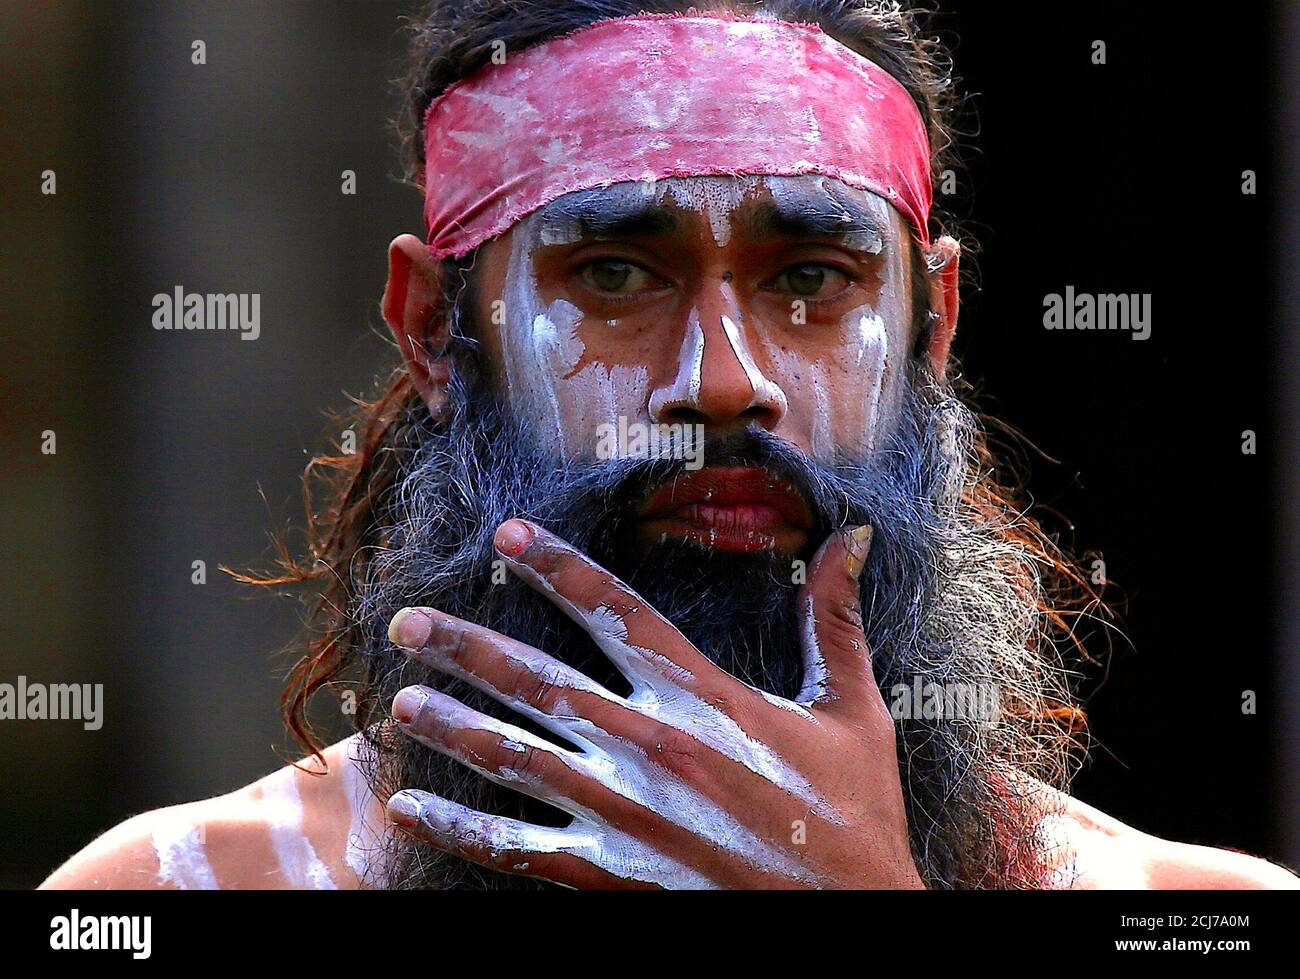 An Australian Aboriginal wearing traditional dress prepares to perform welcoming ceremony at Government House in Sydney, Australia, June 28, 2017. REUTERS/David Gray Stock Photo - Alamy